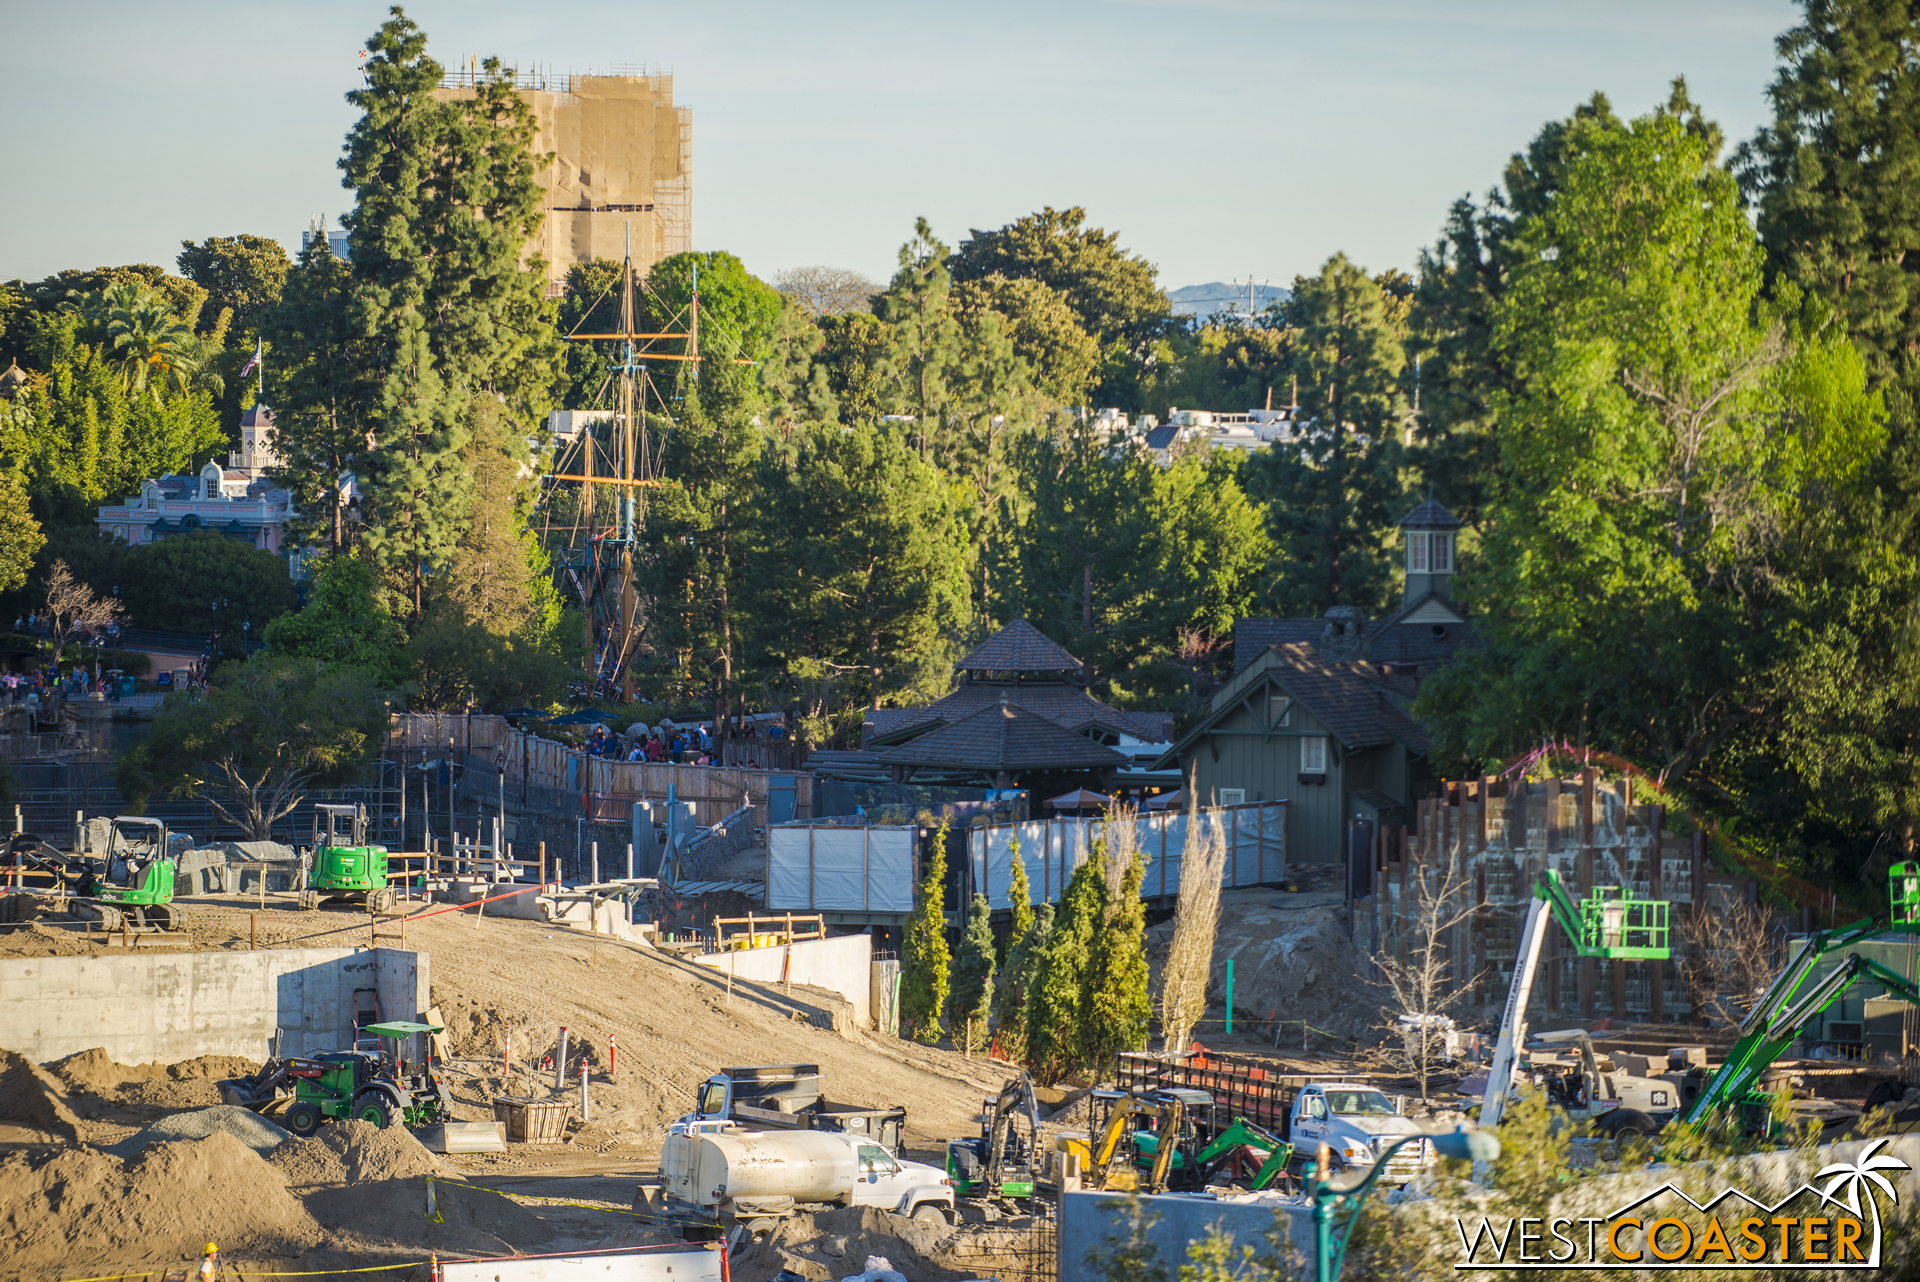  Guardians of the Galaxy is still fully concealed this week, but the back and one side of the building has actually been completely uncovered with scaffolding taken down to reveal the tower's new paint job, which might be best described as "Tomorrowl